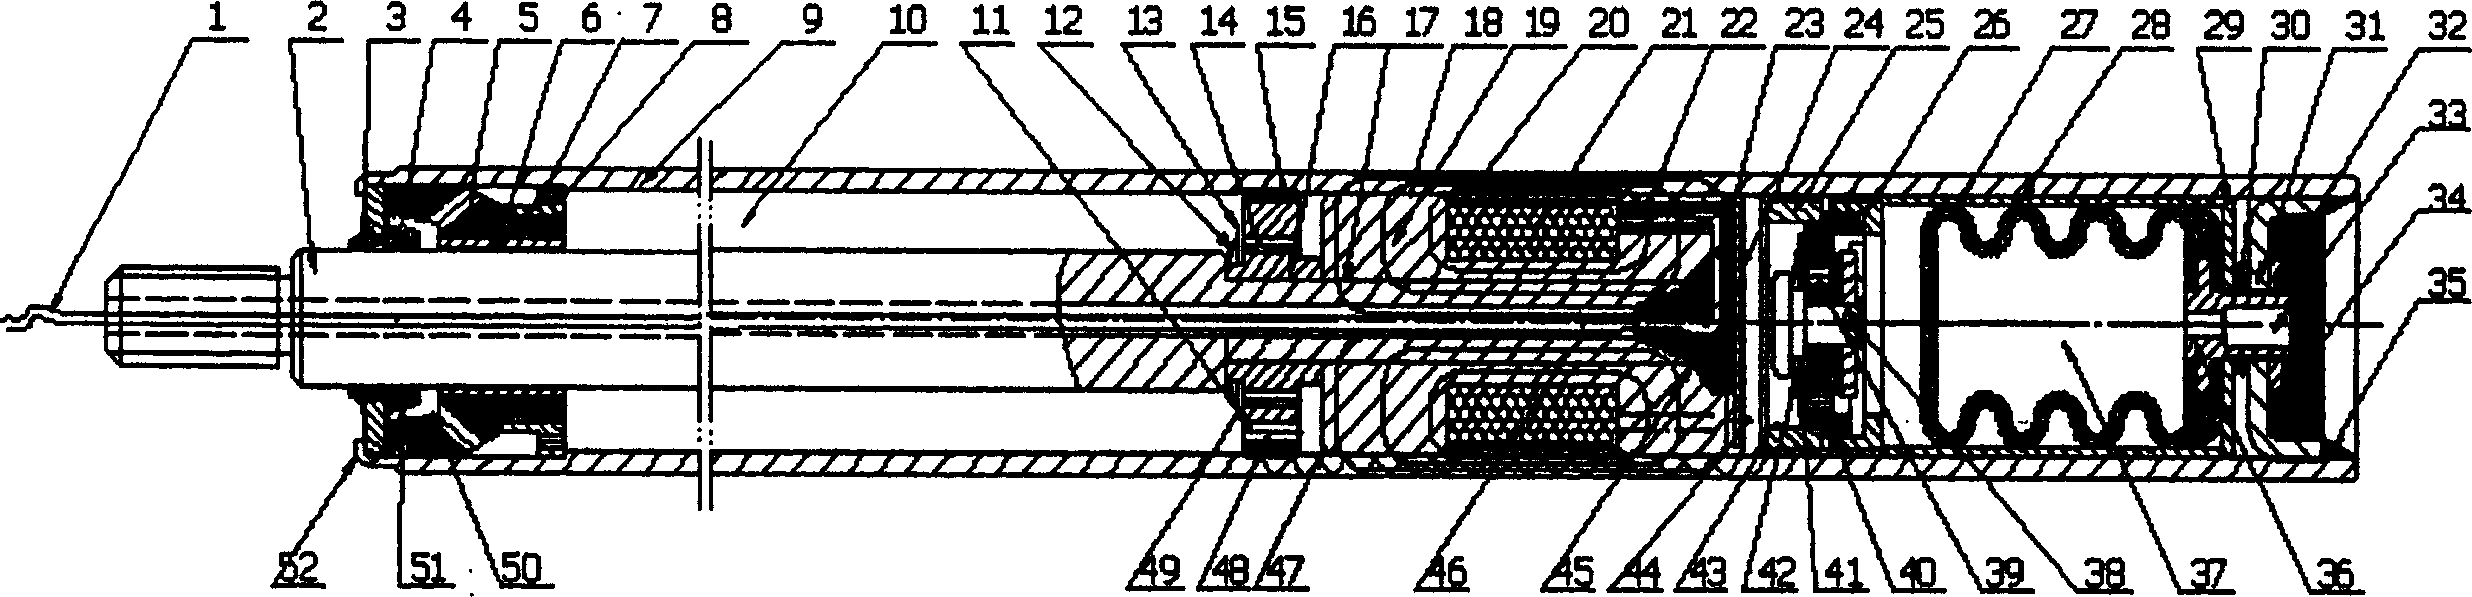 Magnetorheological suspensions damping device for automobile suspension system